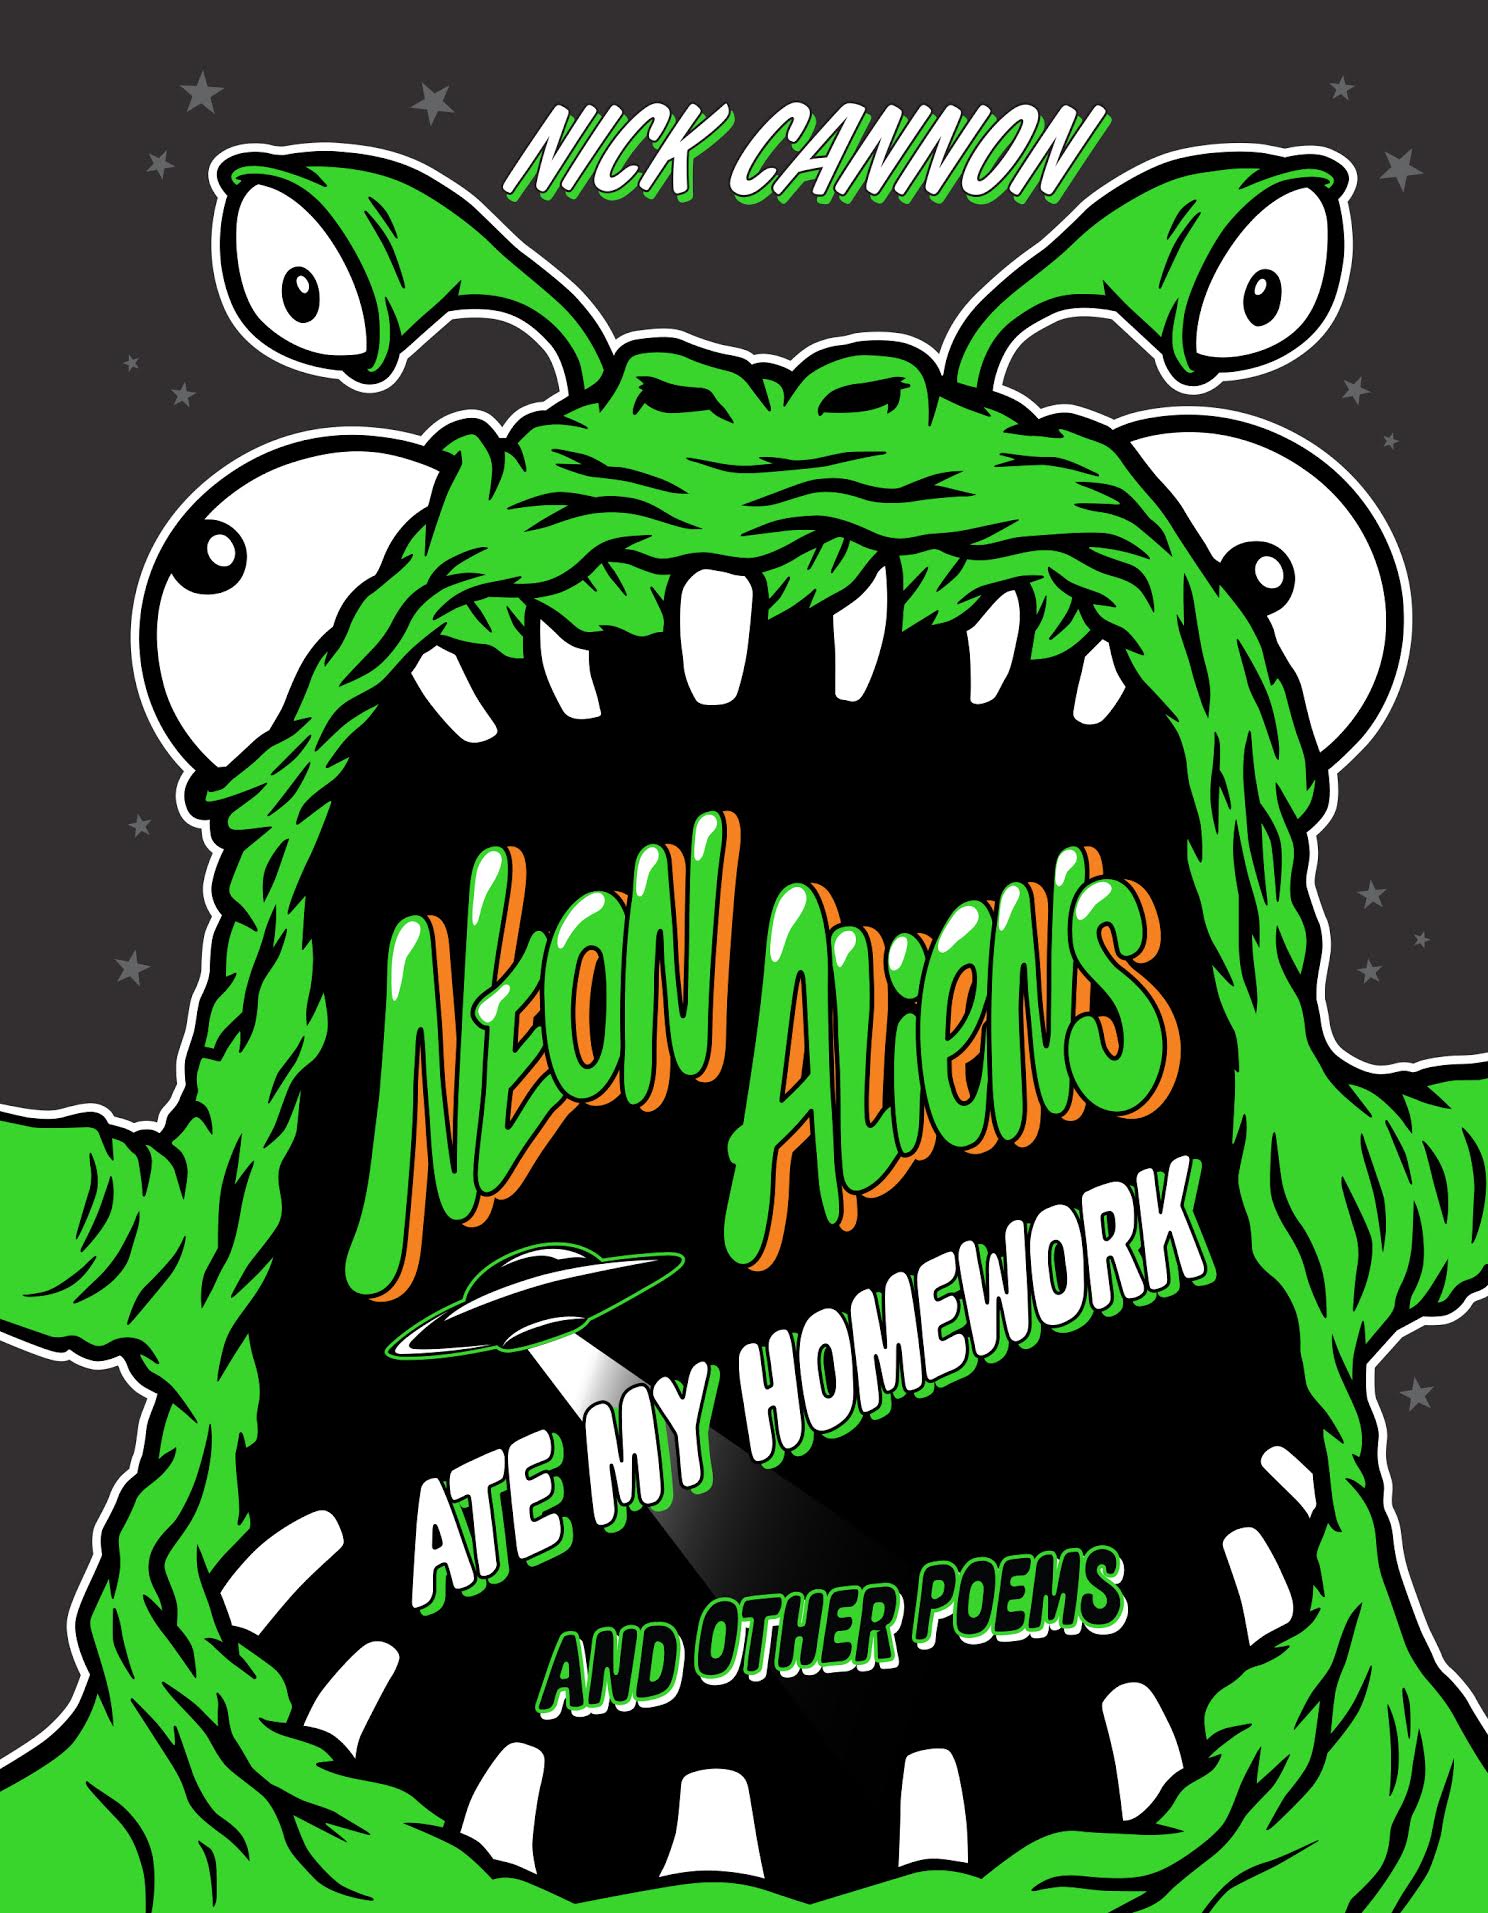 “Neon Aliens Ate My Homework & Other Poems” Available Now